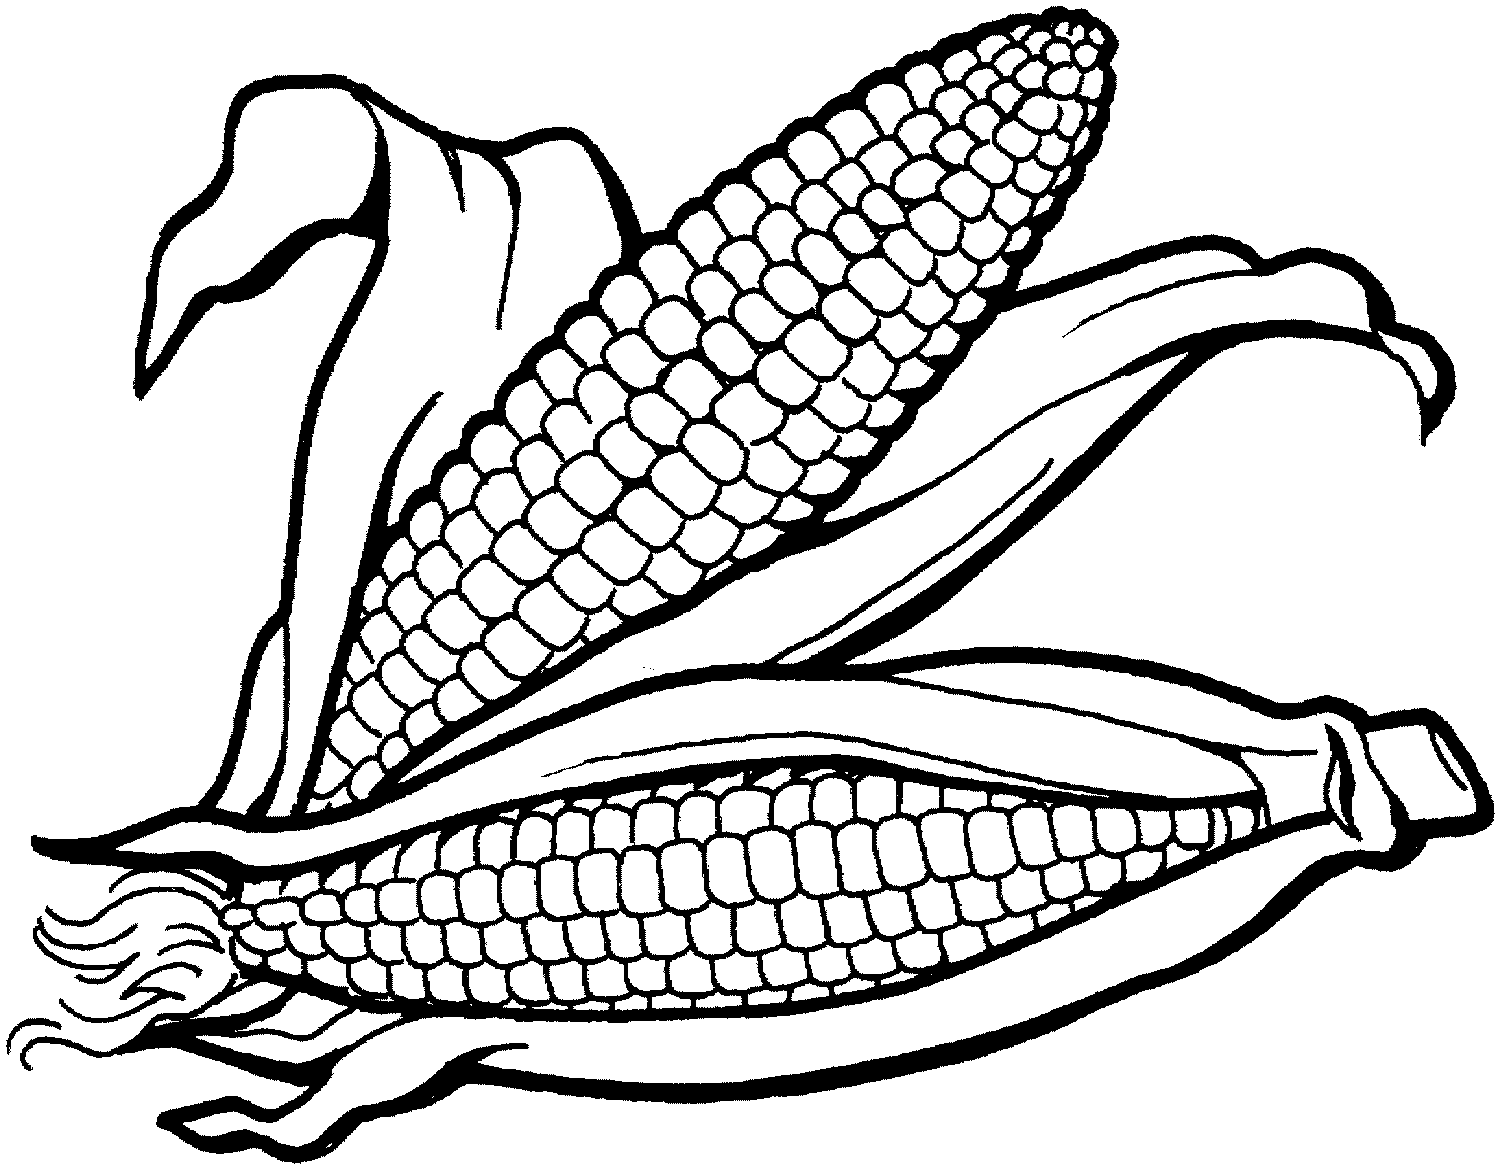 Corn clipart black and white free images